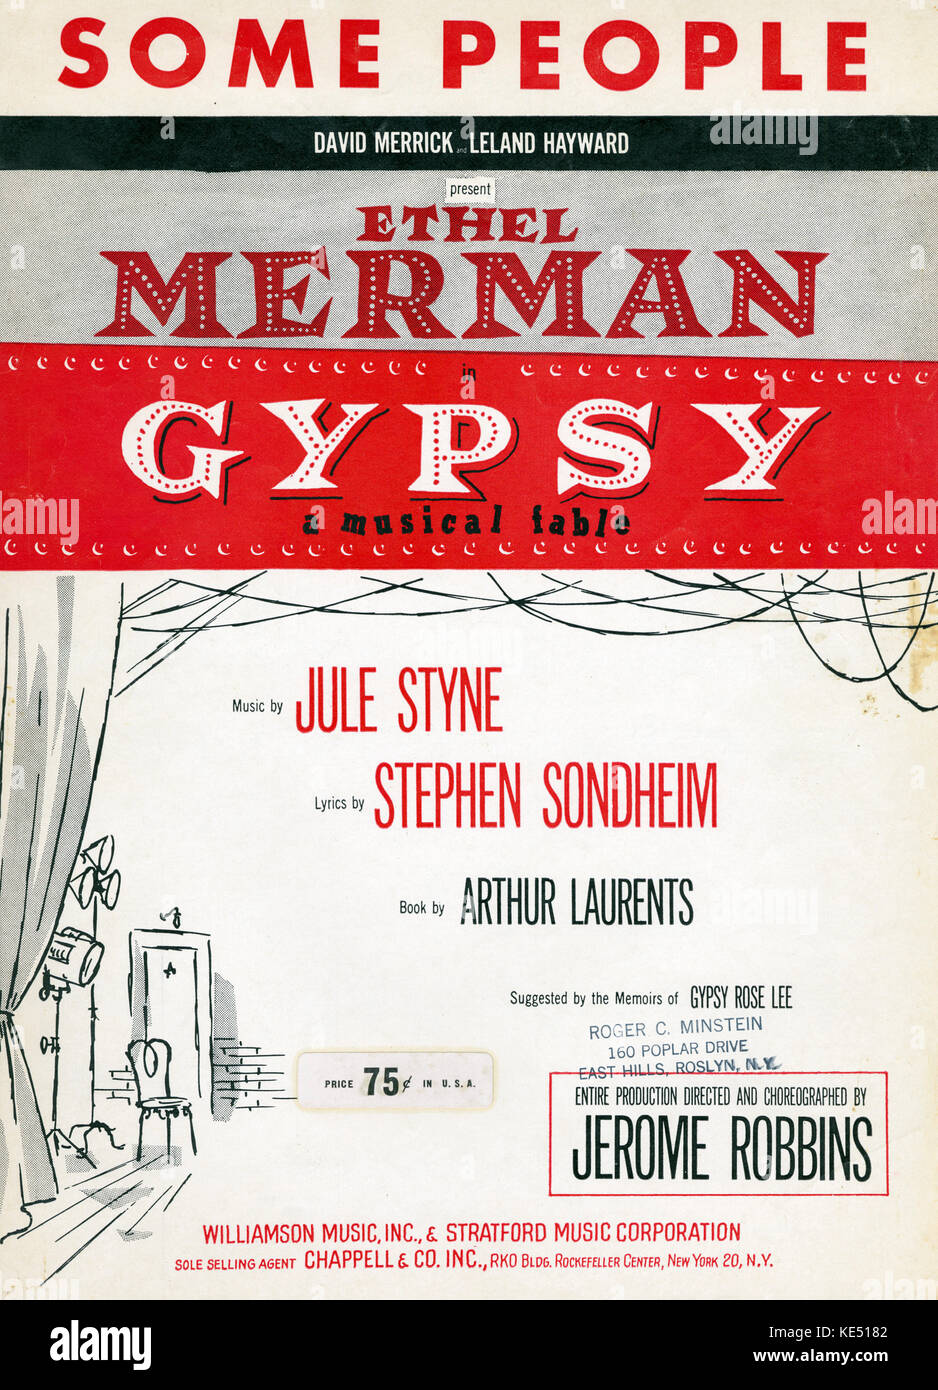 Gypsy - a musical fable score cover - lyrics by Stephen Sondheim & music by Jule Styne. Published by Williamson Music, USA, 01959. Score for 'Some People'. Stock Photo